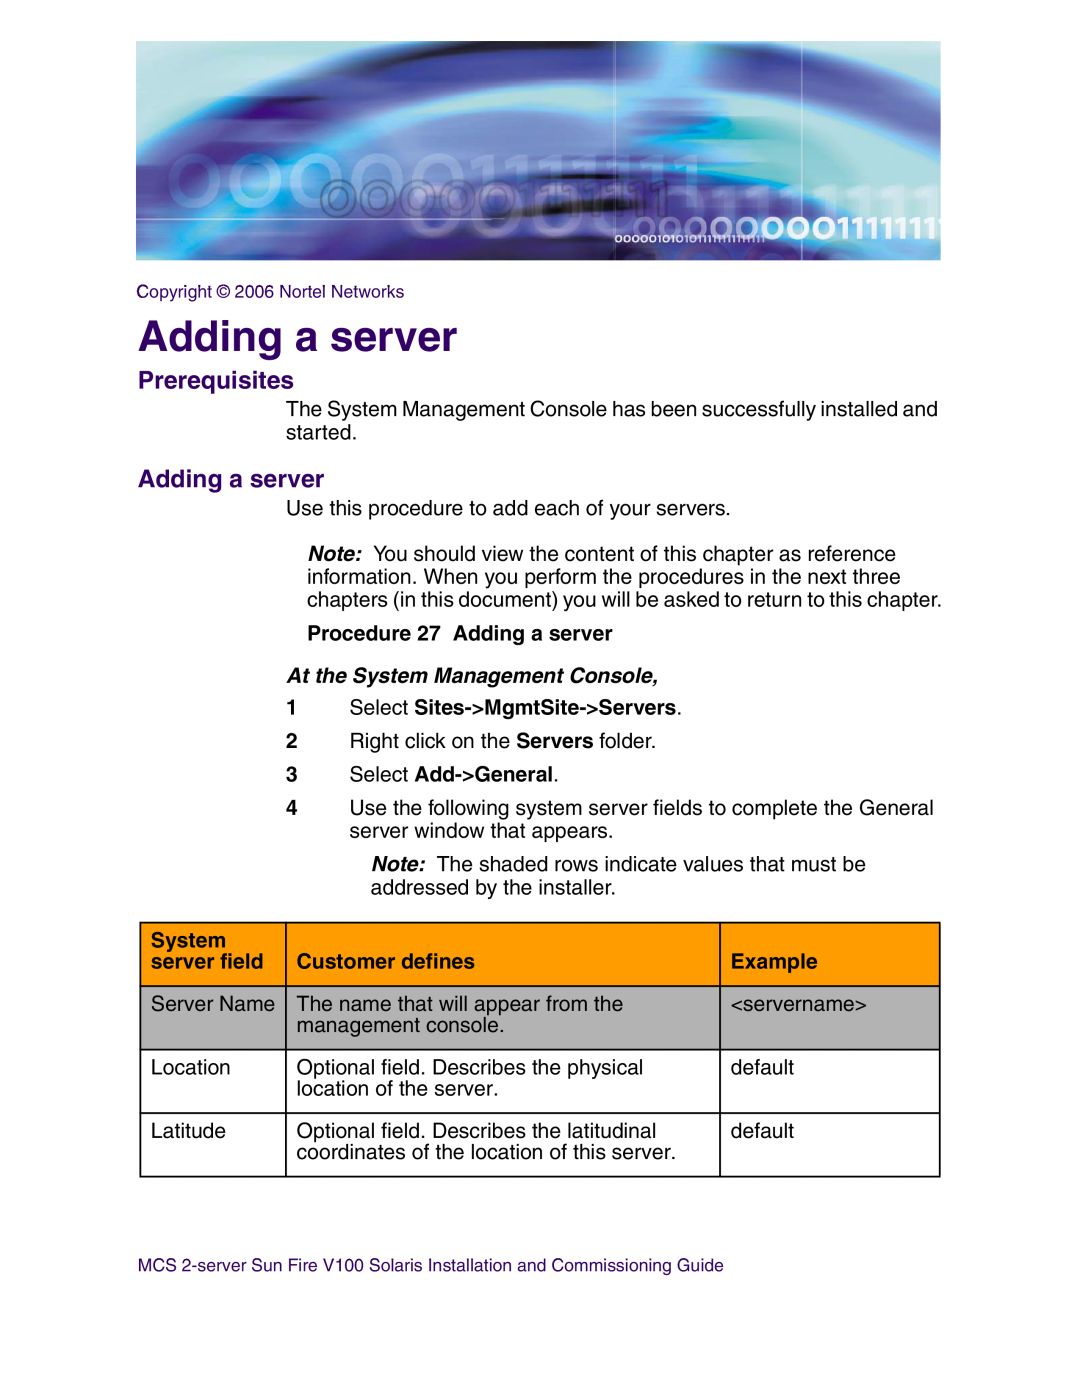 Nortel Networks V100 Procedure 27 Adding a server, At the System Management Console, Select Sites-MgmtSite-Servers 